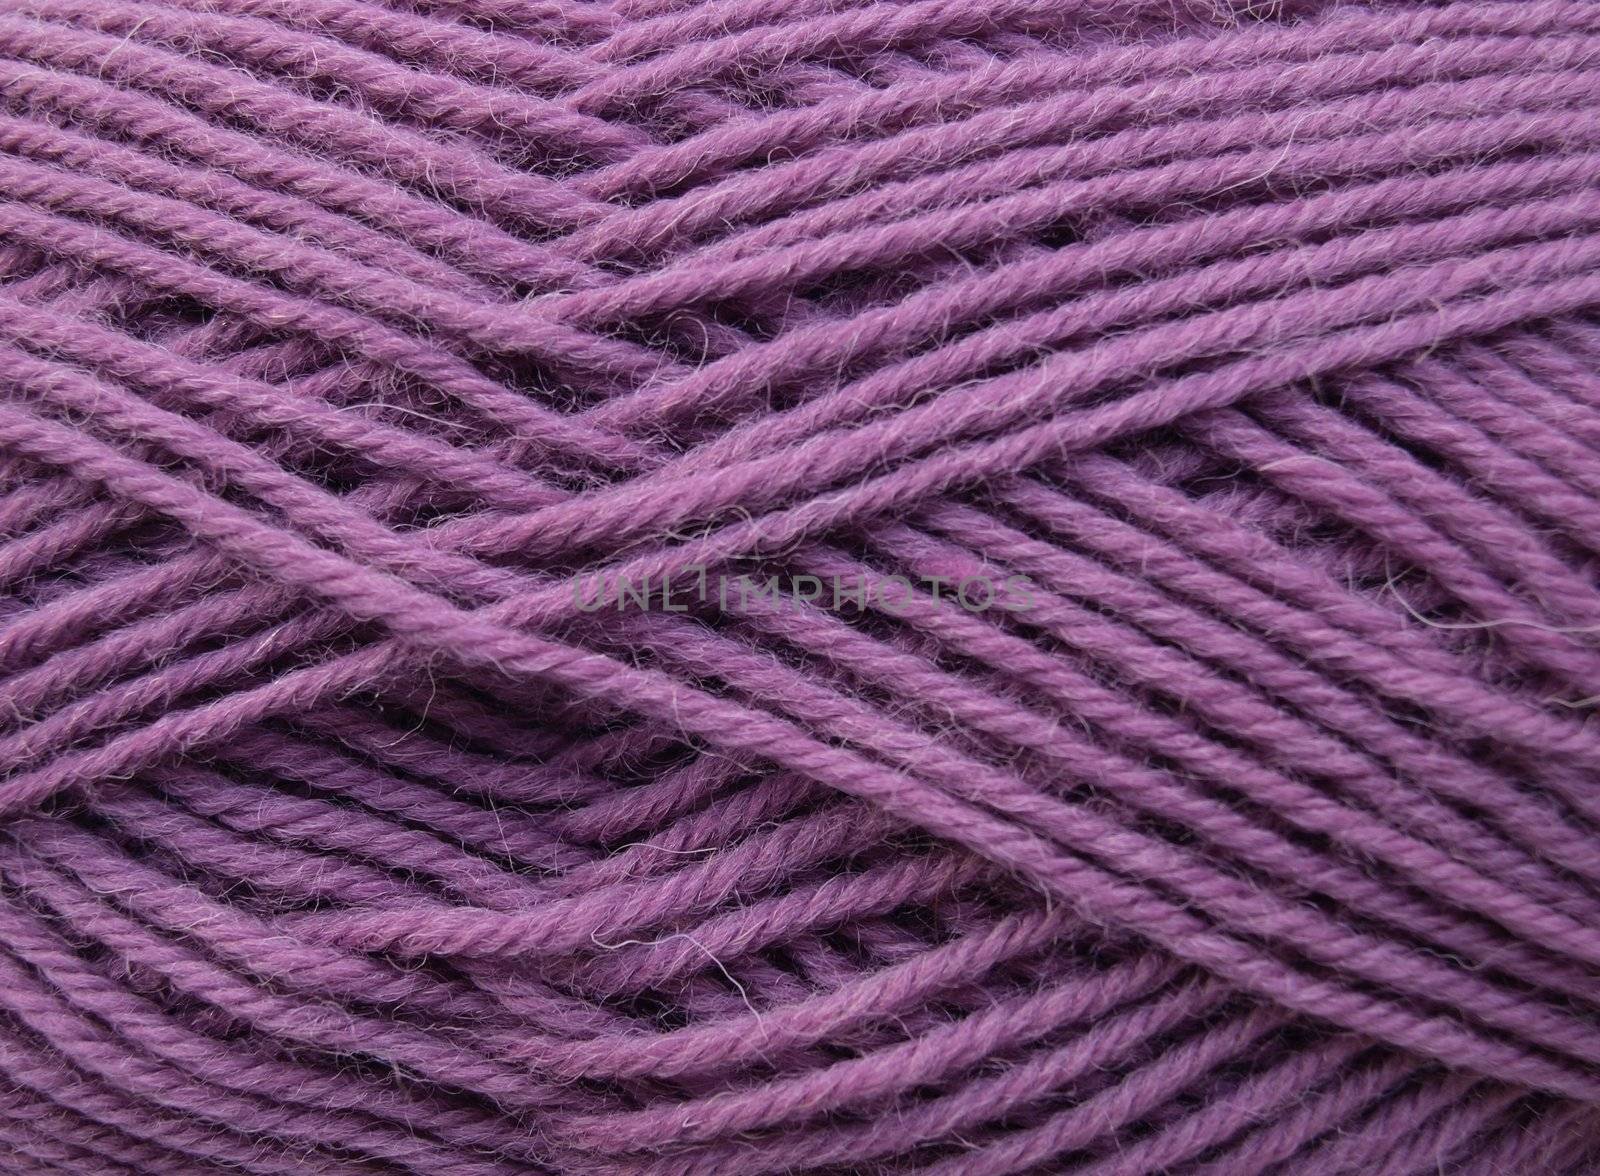 Knitting yarn forming a pattern of a network